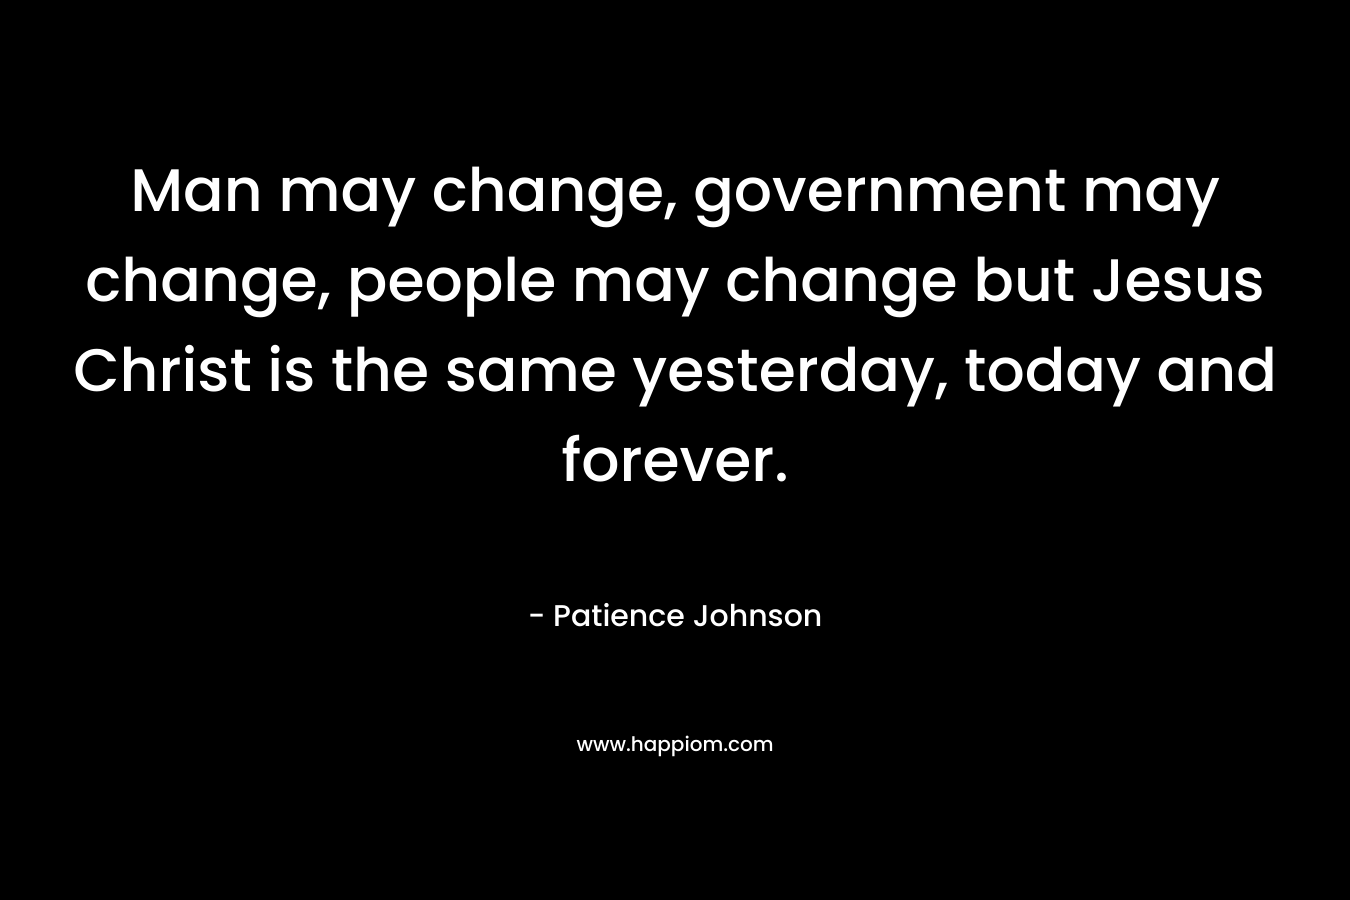 Man may change, government may change, people may change but Jesus Christ is the same yesterday, today and forever.